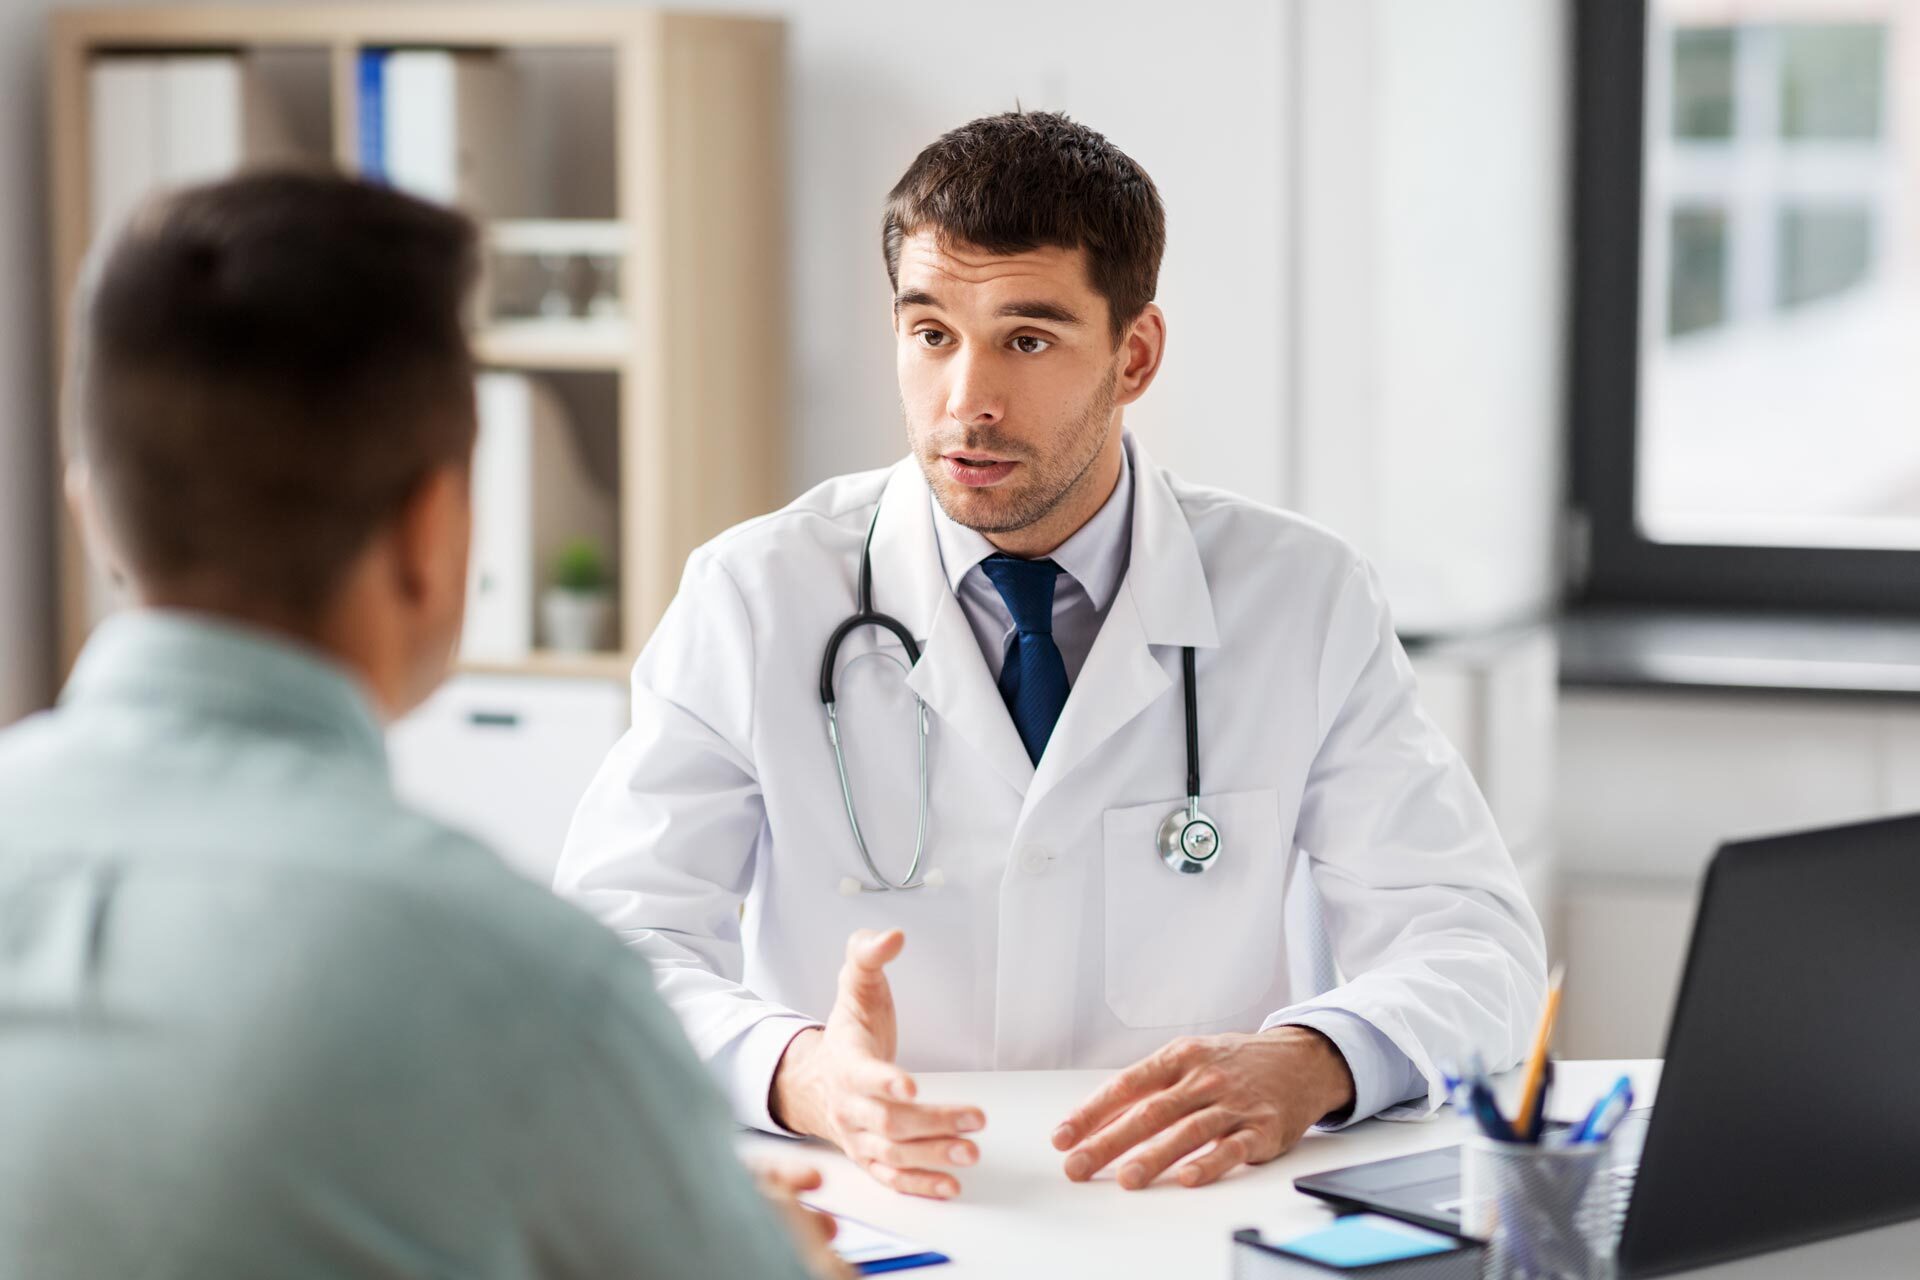 Physician discussing treatment options with patient